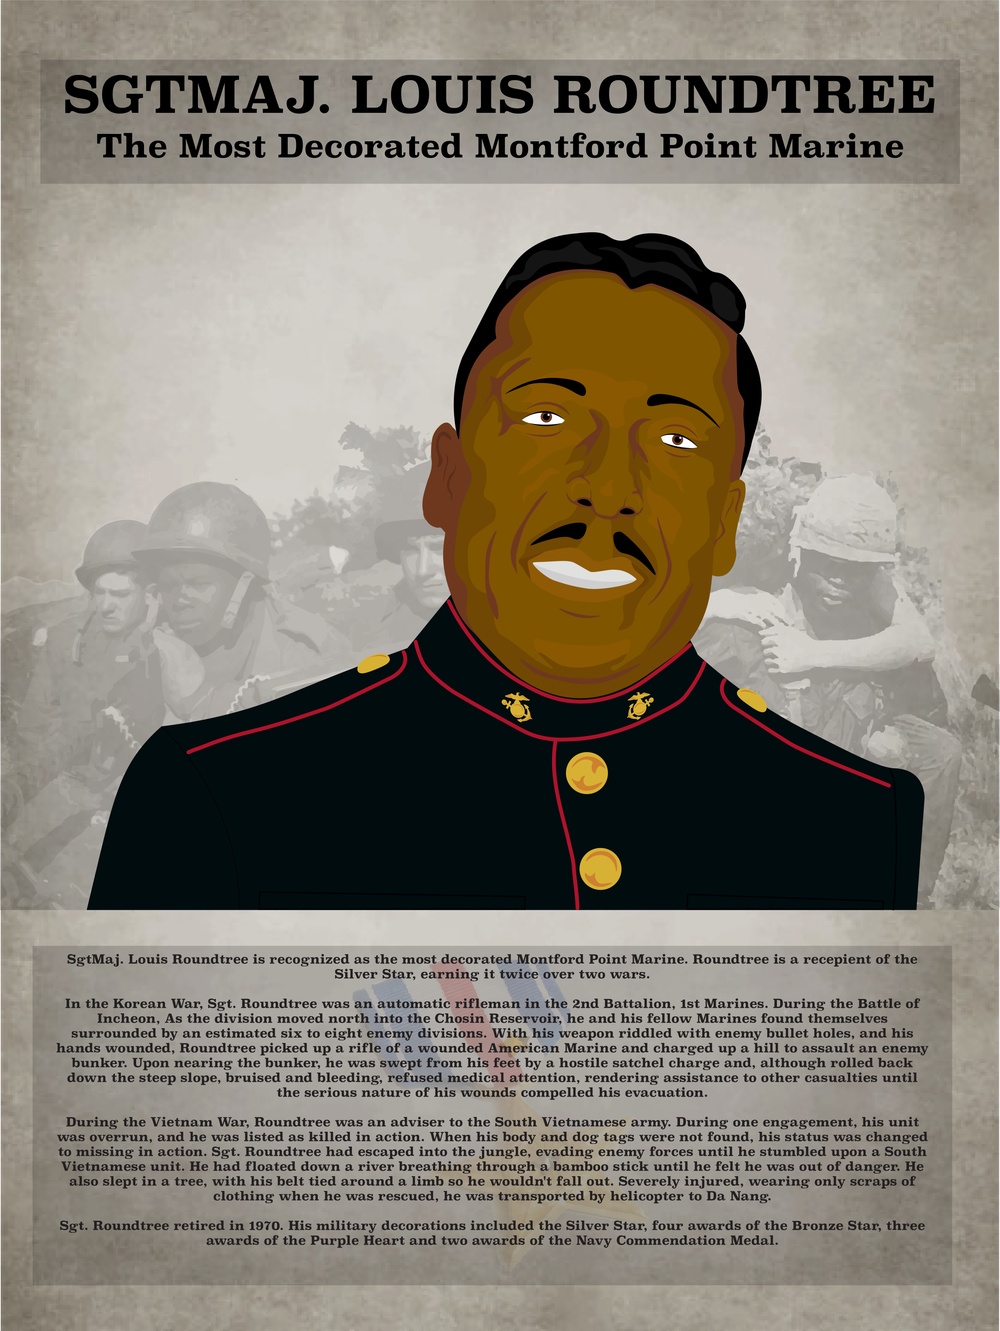 The Most Decorated Montford Point Marine - Sgt. Maj. Louis Roundtree